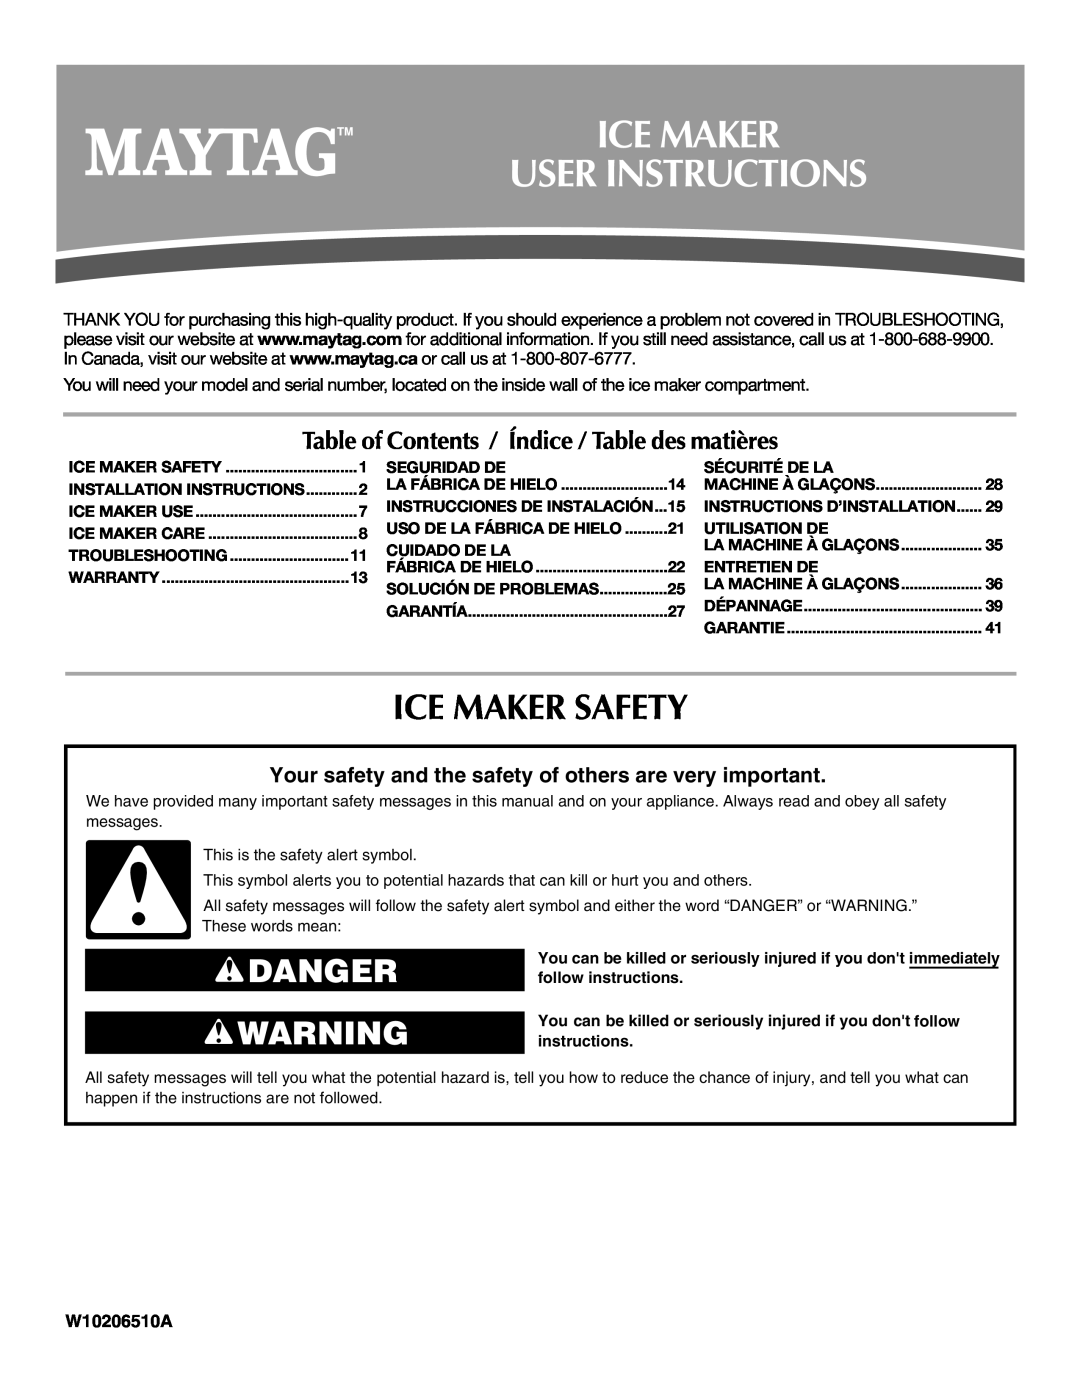 Maytag W10206488A installation instructions Ice Maker User Instructions, Ice Maker Safety, Danger, W10206510A 